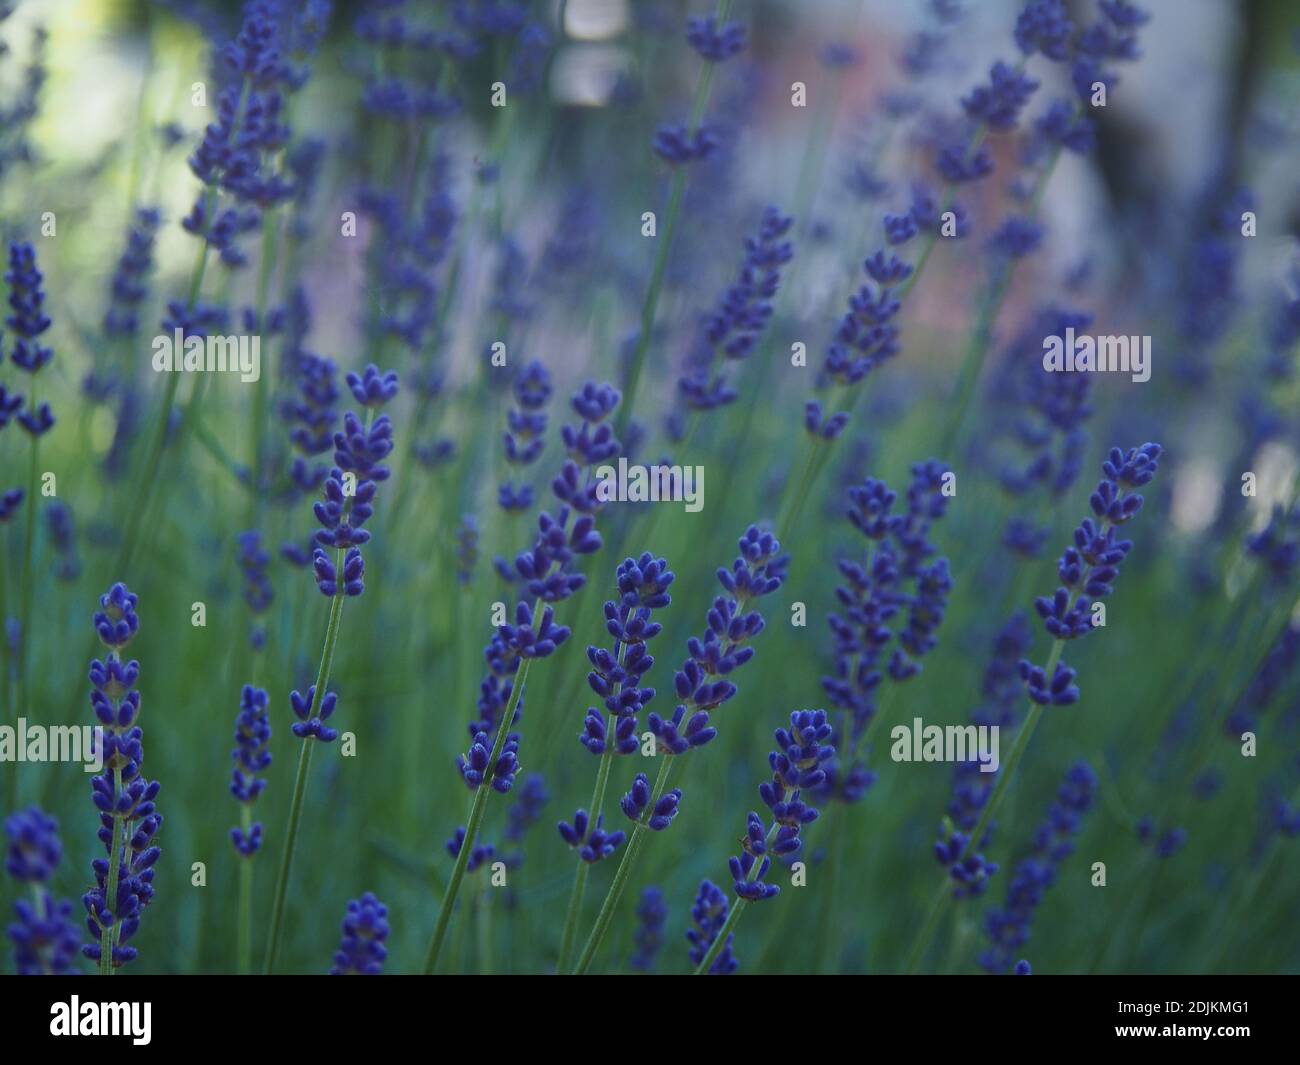 Close up view of the purple flowers of the lavender bush on a warm spring day. Stock Photo